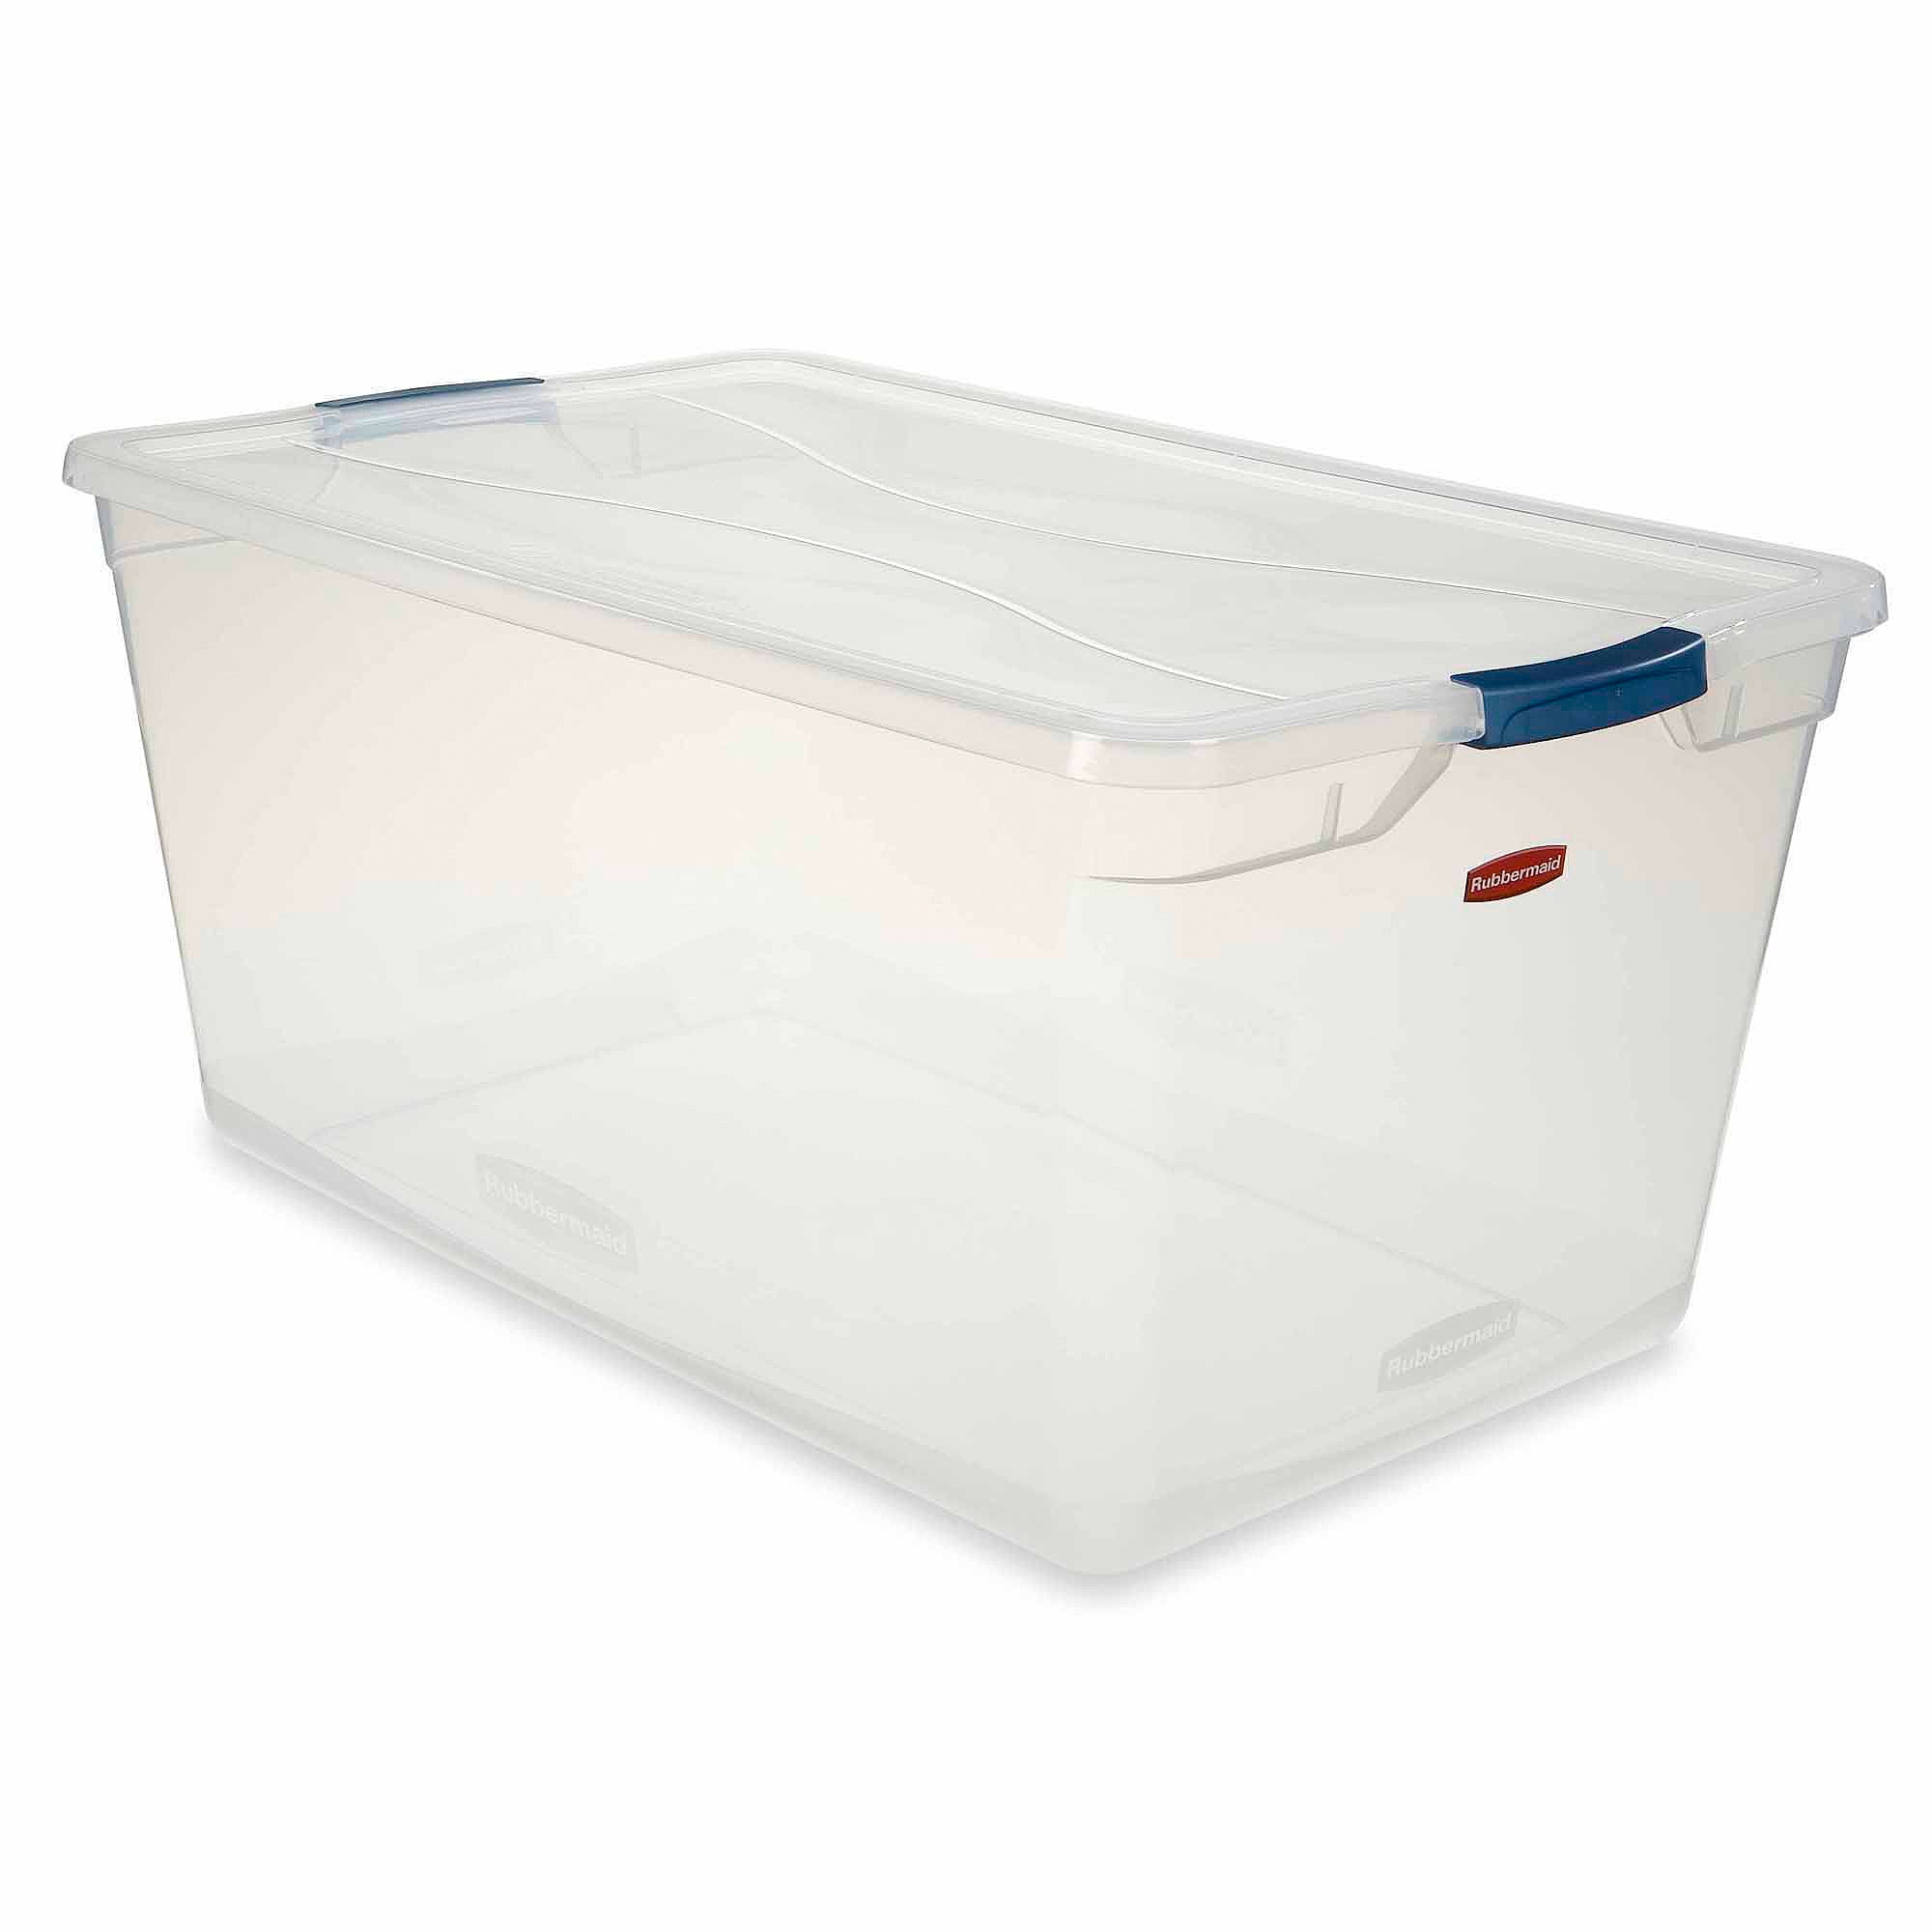 Rubbermaid Roughneck 95 Qt/23.75 Gal Stackable Storage Containers, Clear w/Latching Grey Lids, 4-Pack, Clear/Grey